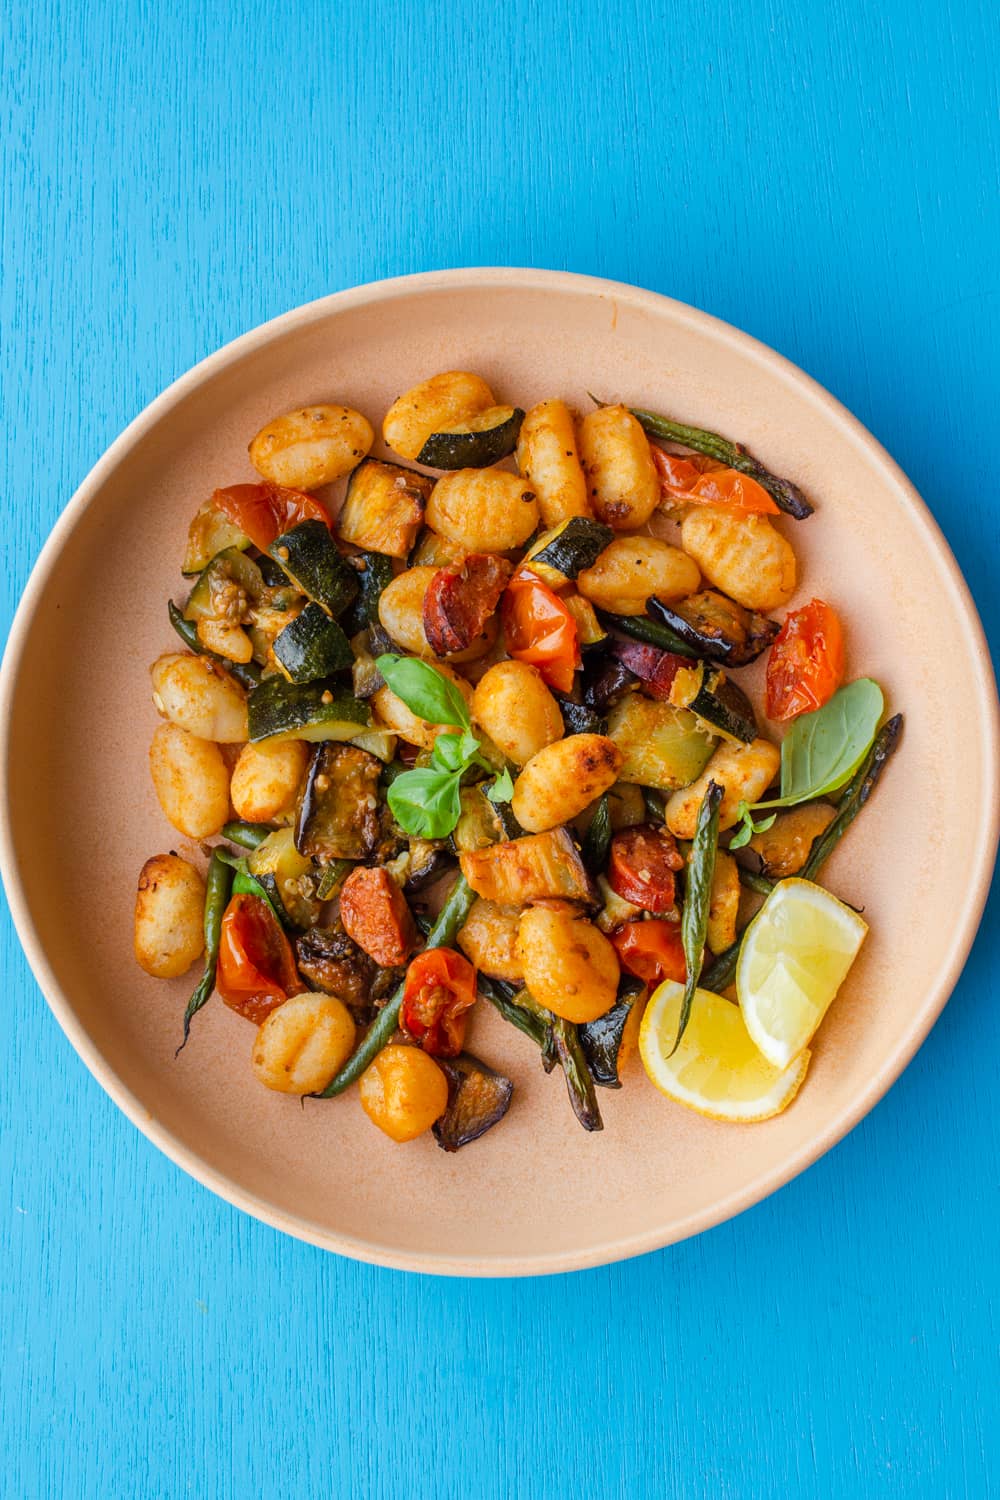 Overhead shot of bowl of Crispy Roasted Gnocchi with Chorizo and Vegetables